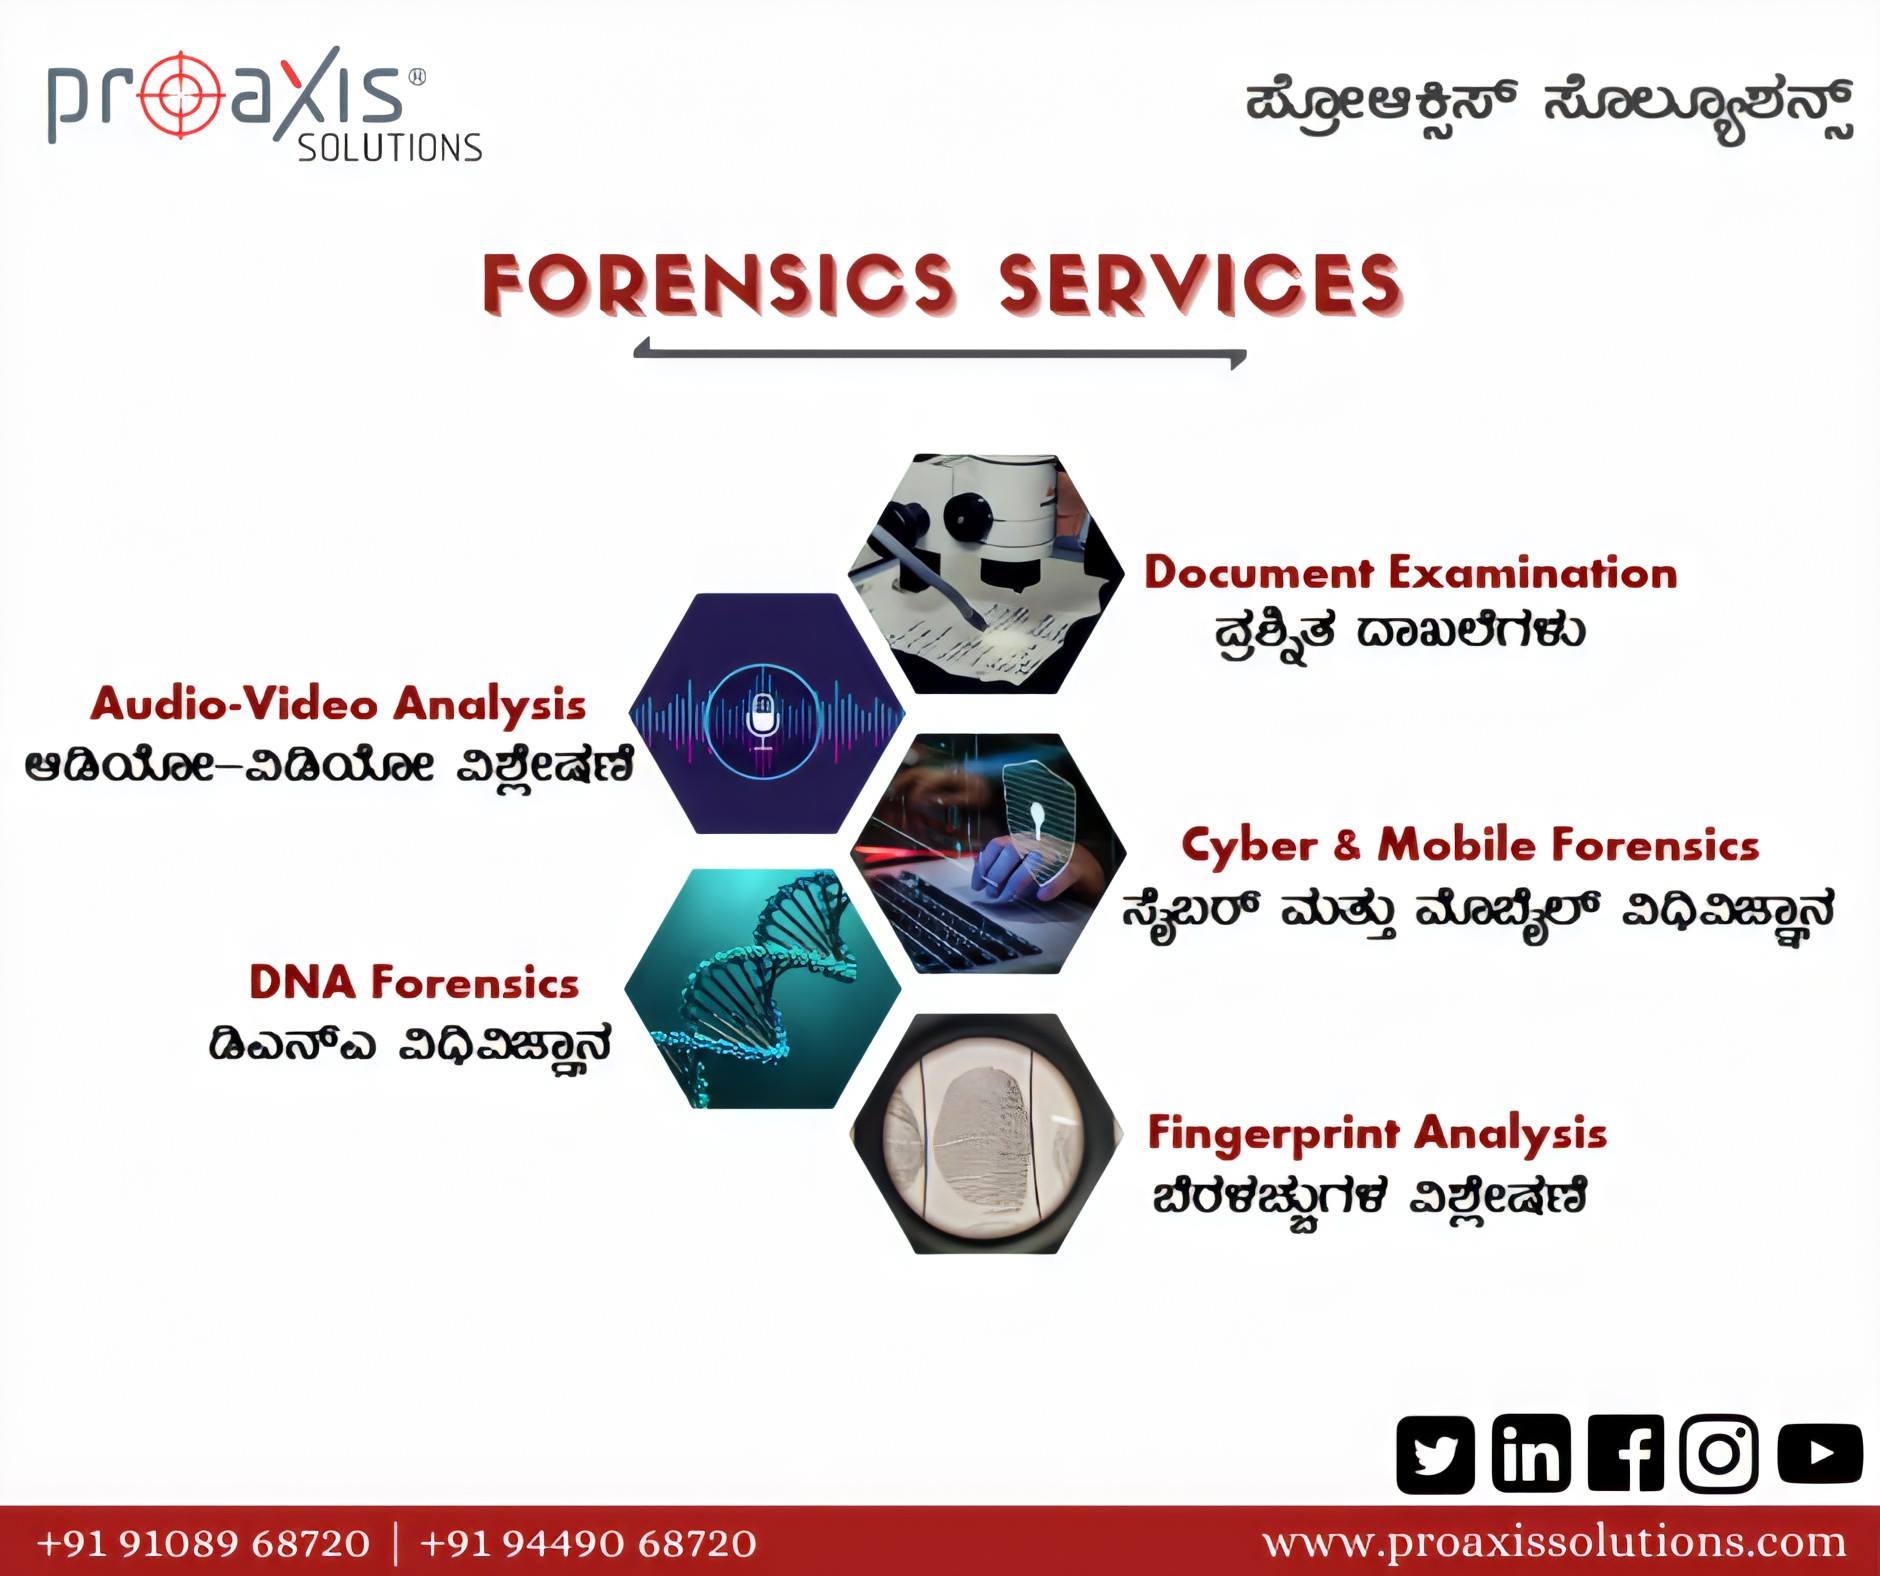 proaxis-solutions-bangalore-forensic-laboratories-c3133909